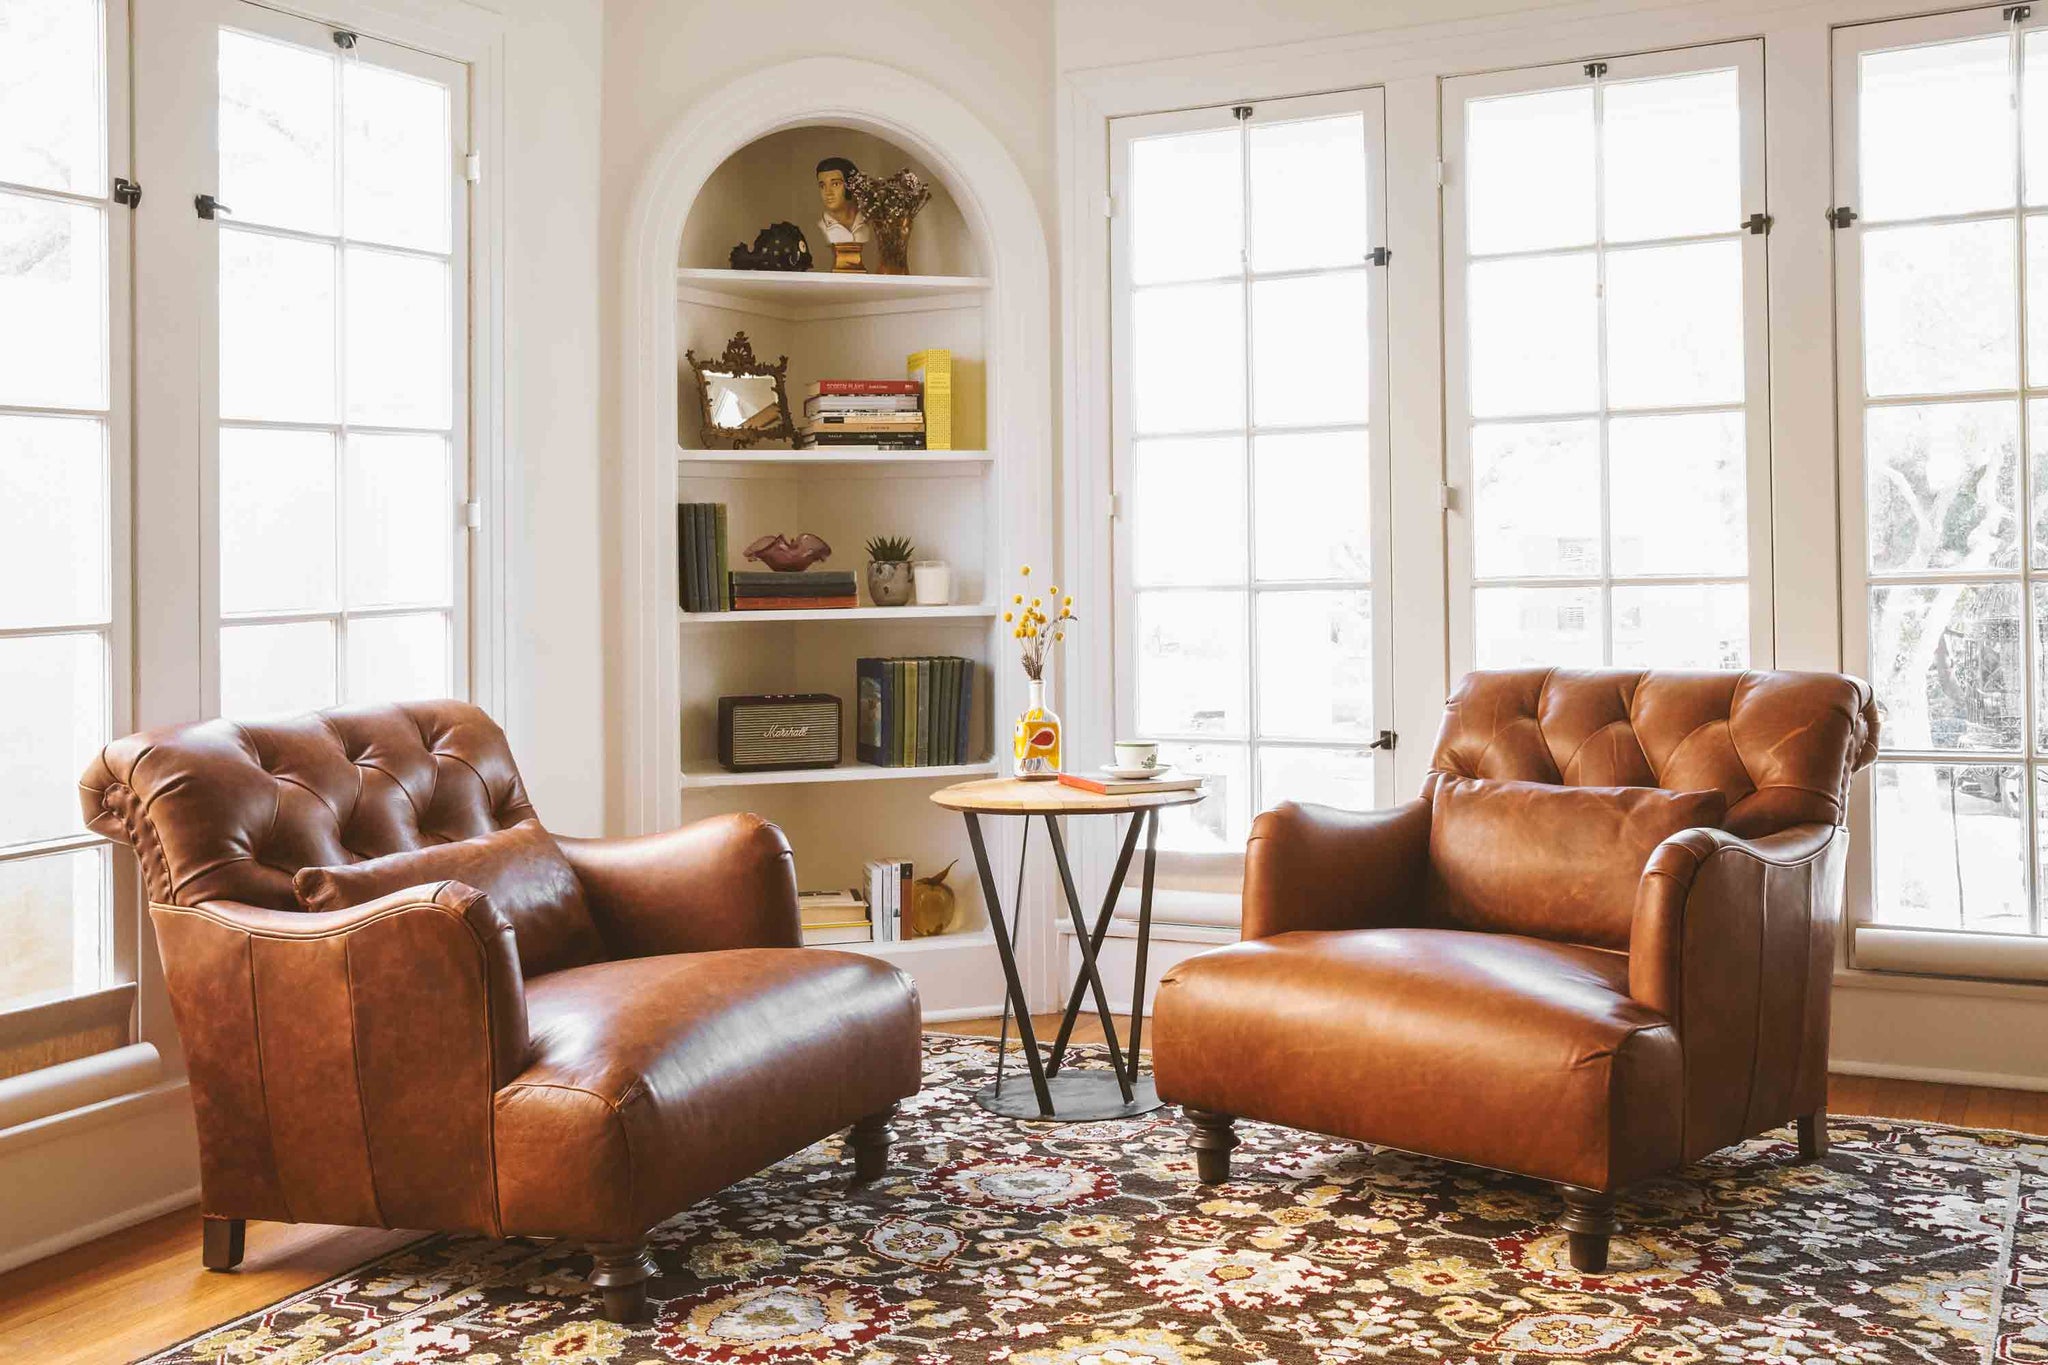  Leather chairs in Spur Terracotta in a white room sitting in front of large windows. 